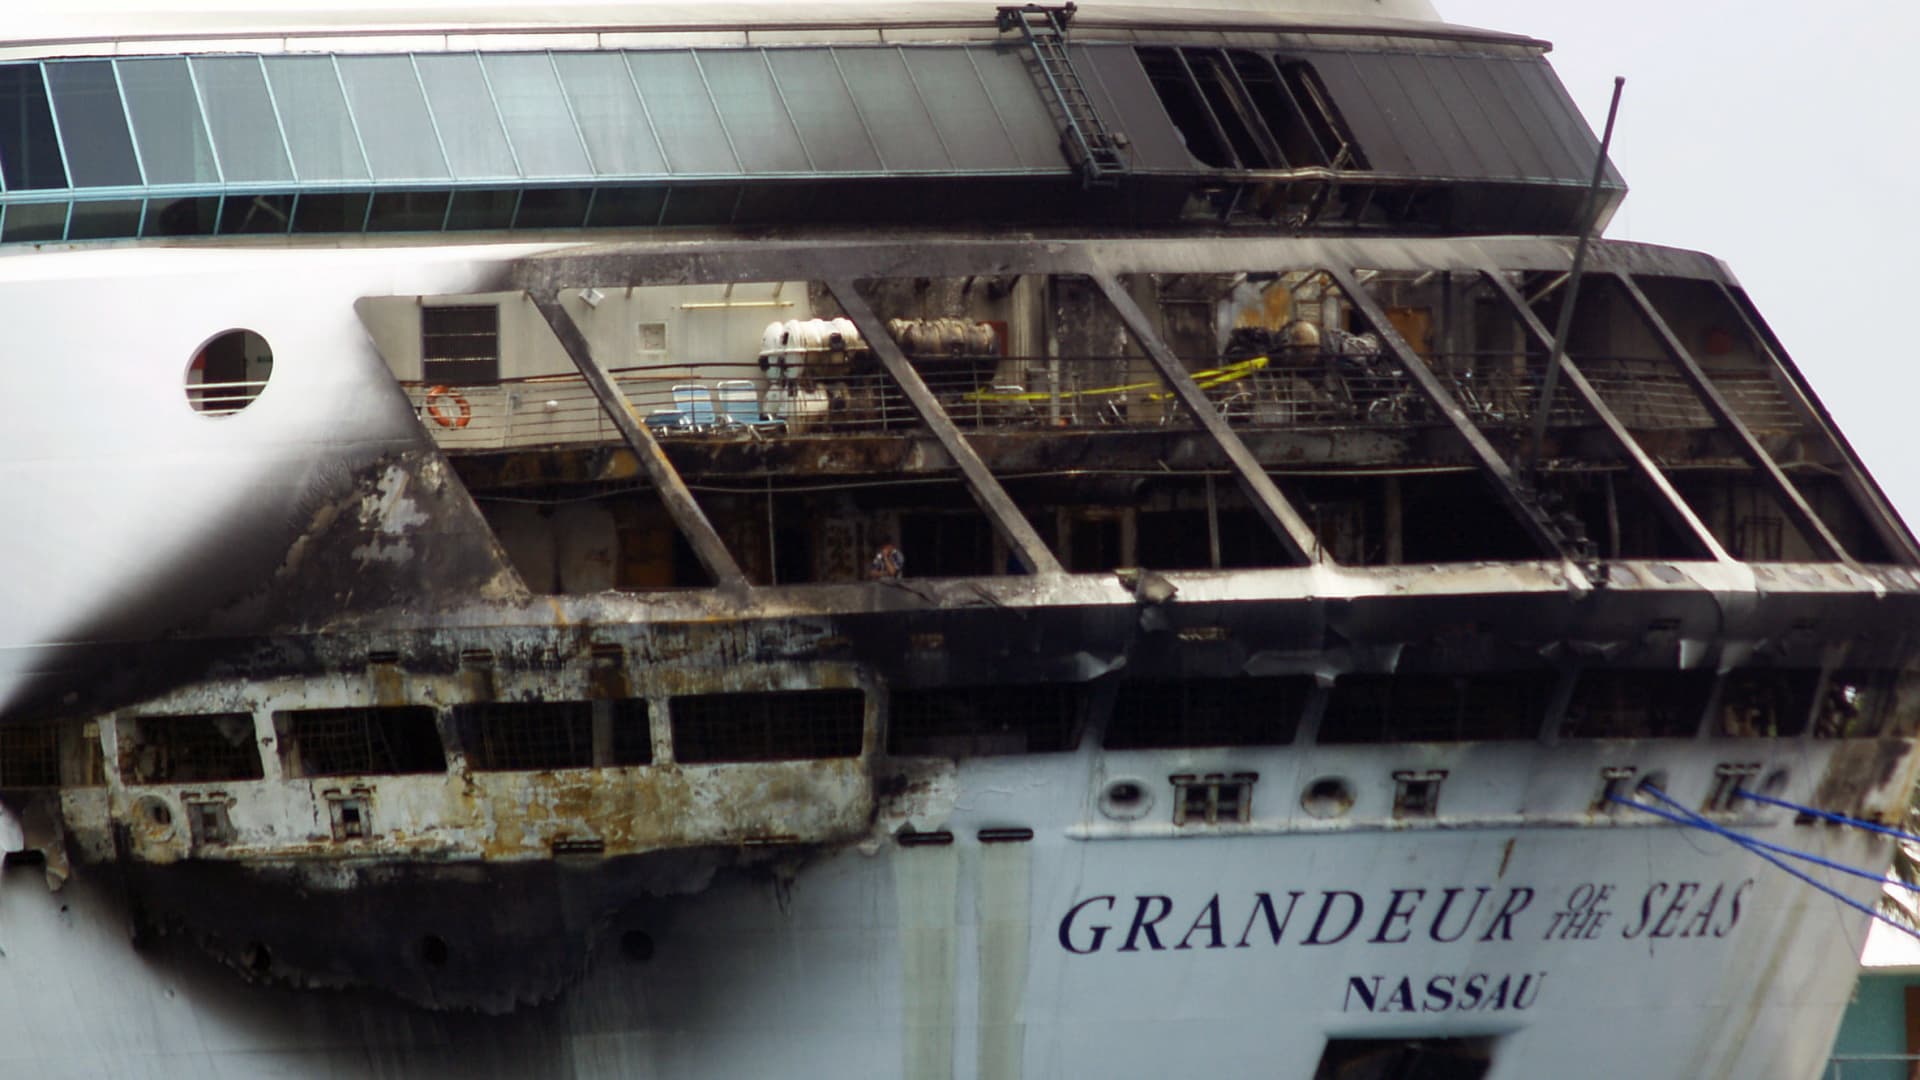 tui cruise liner fire